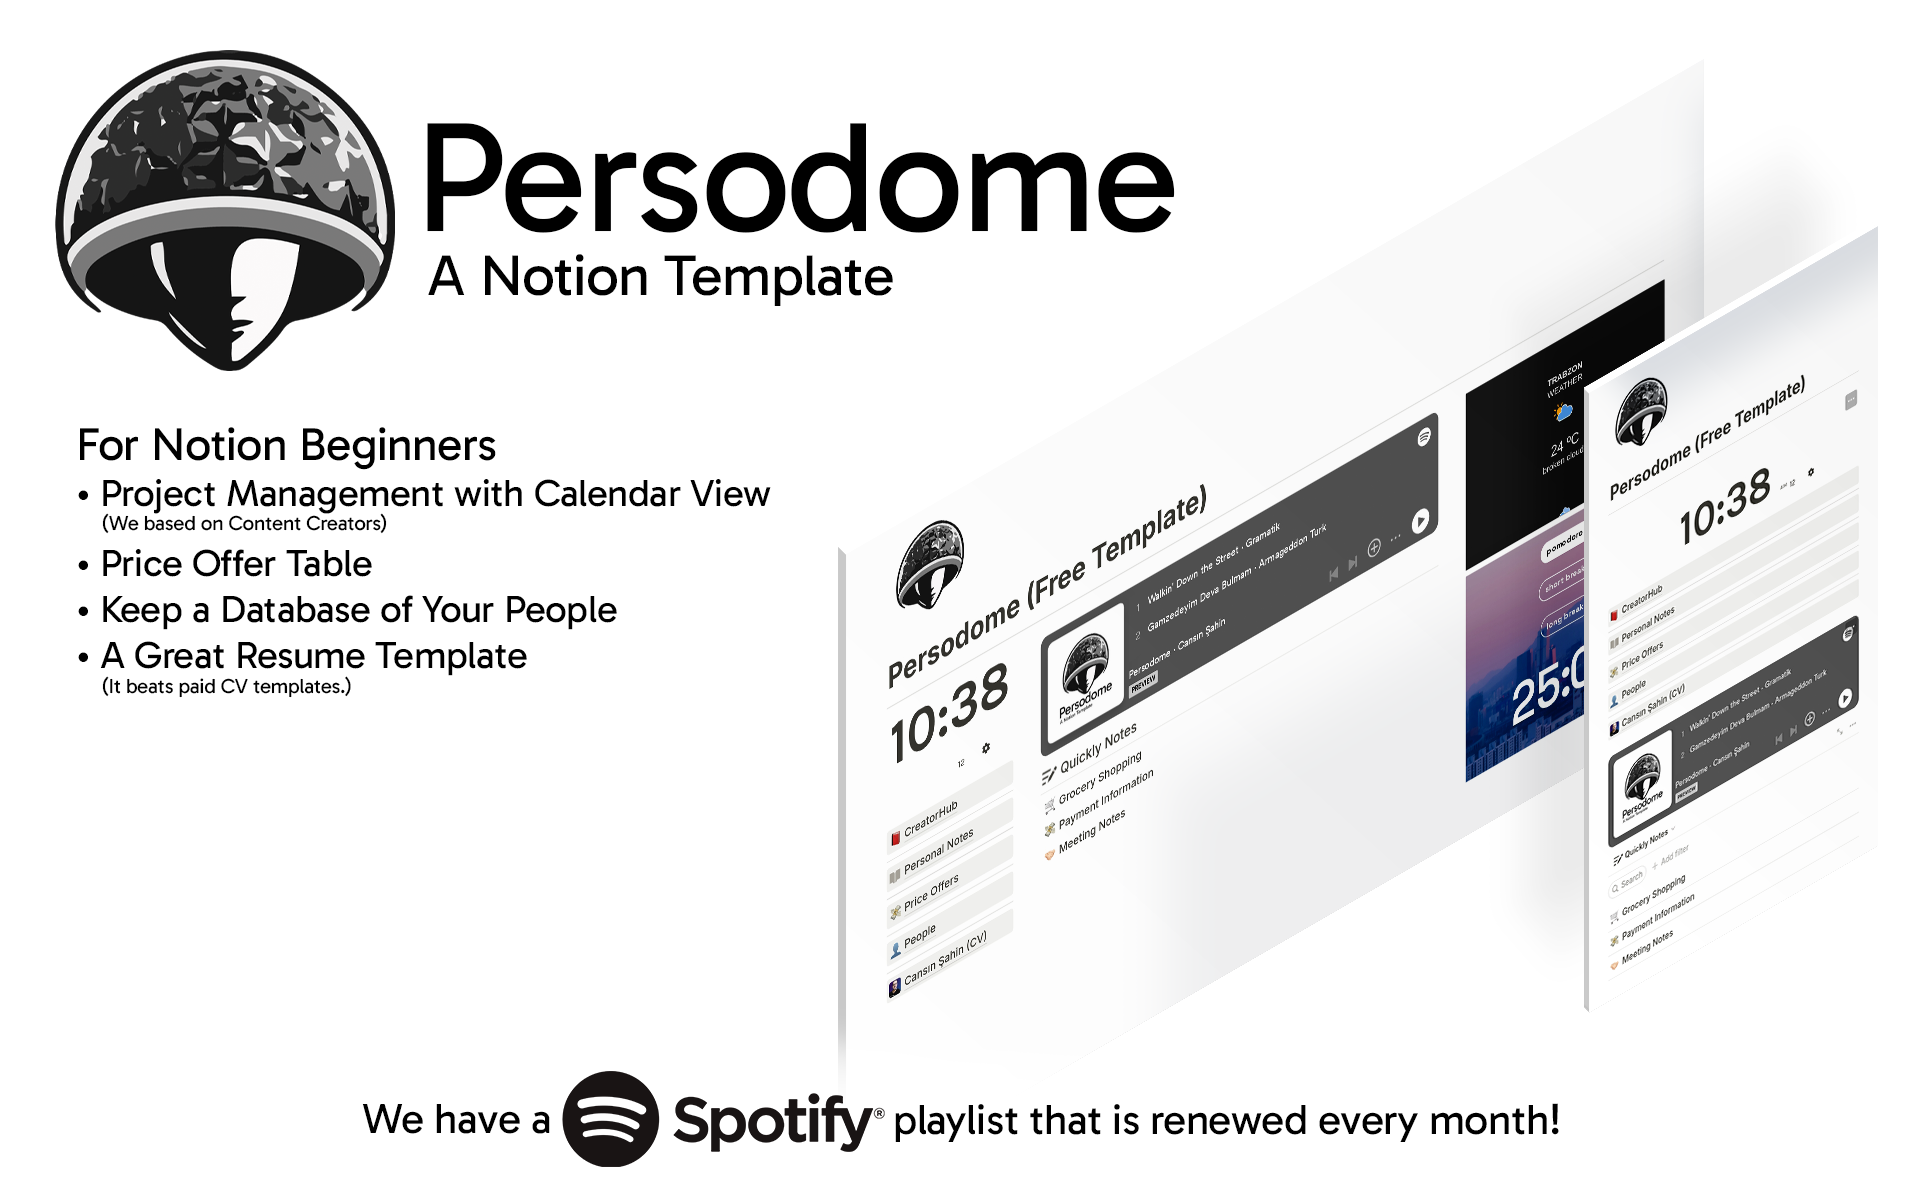 For Notion Beginners
• Project Management with Calendar View  (We based on Content Creators)
• Price Offer Table
• Keep a Database of Your People
• A Great Resume Template (It beats paid CV templates.)

We have a Spotify playlist that is renewed every month!